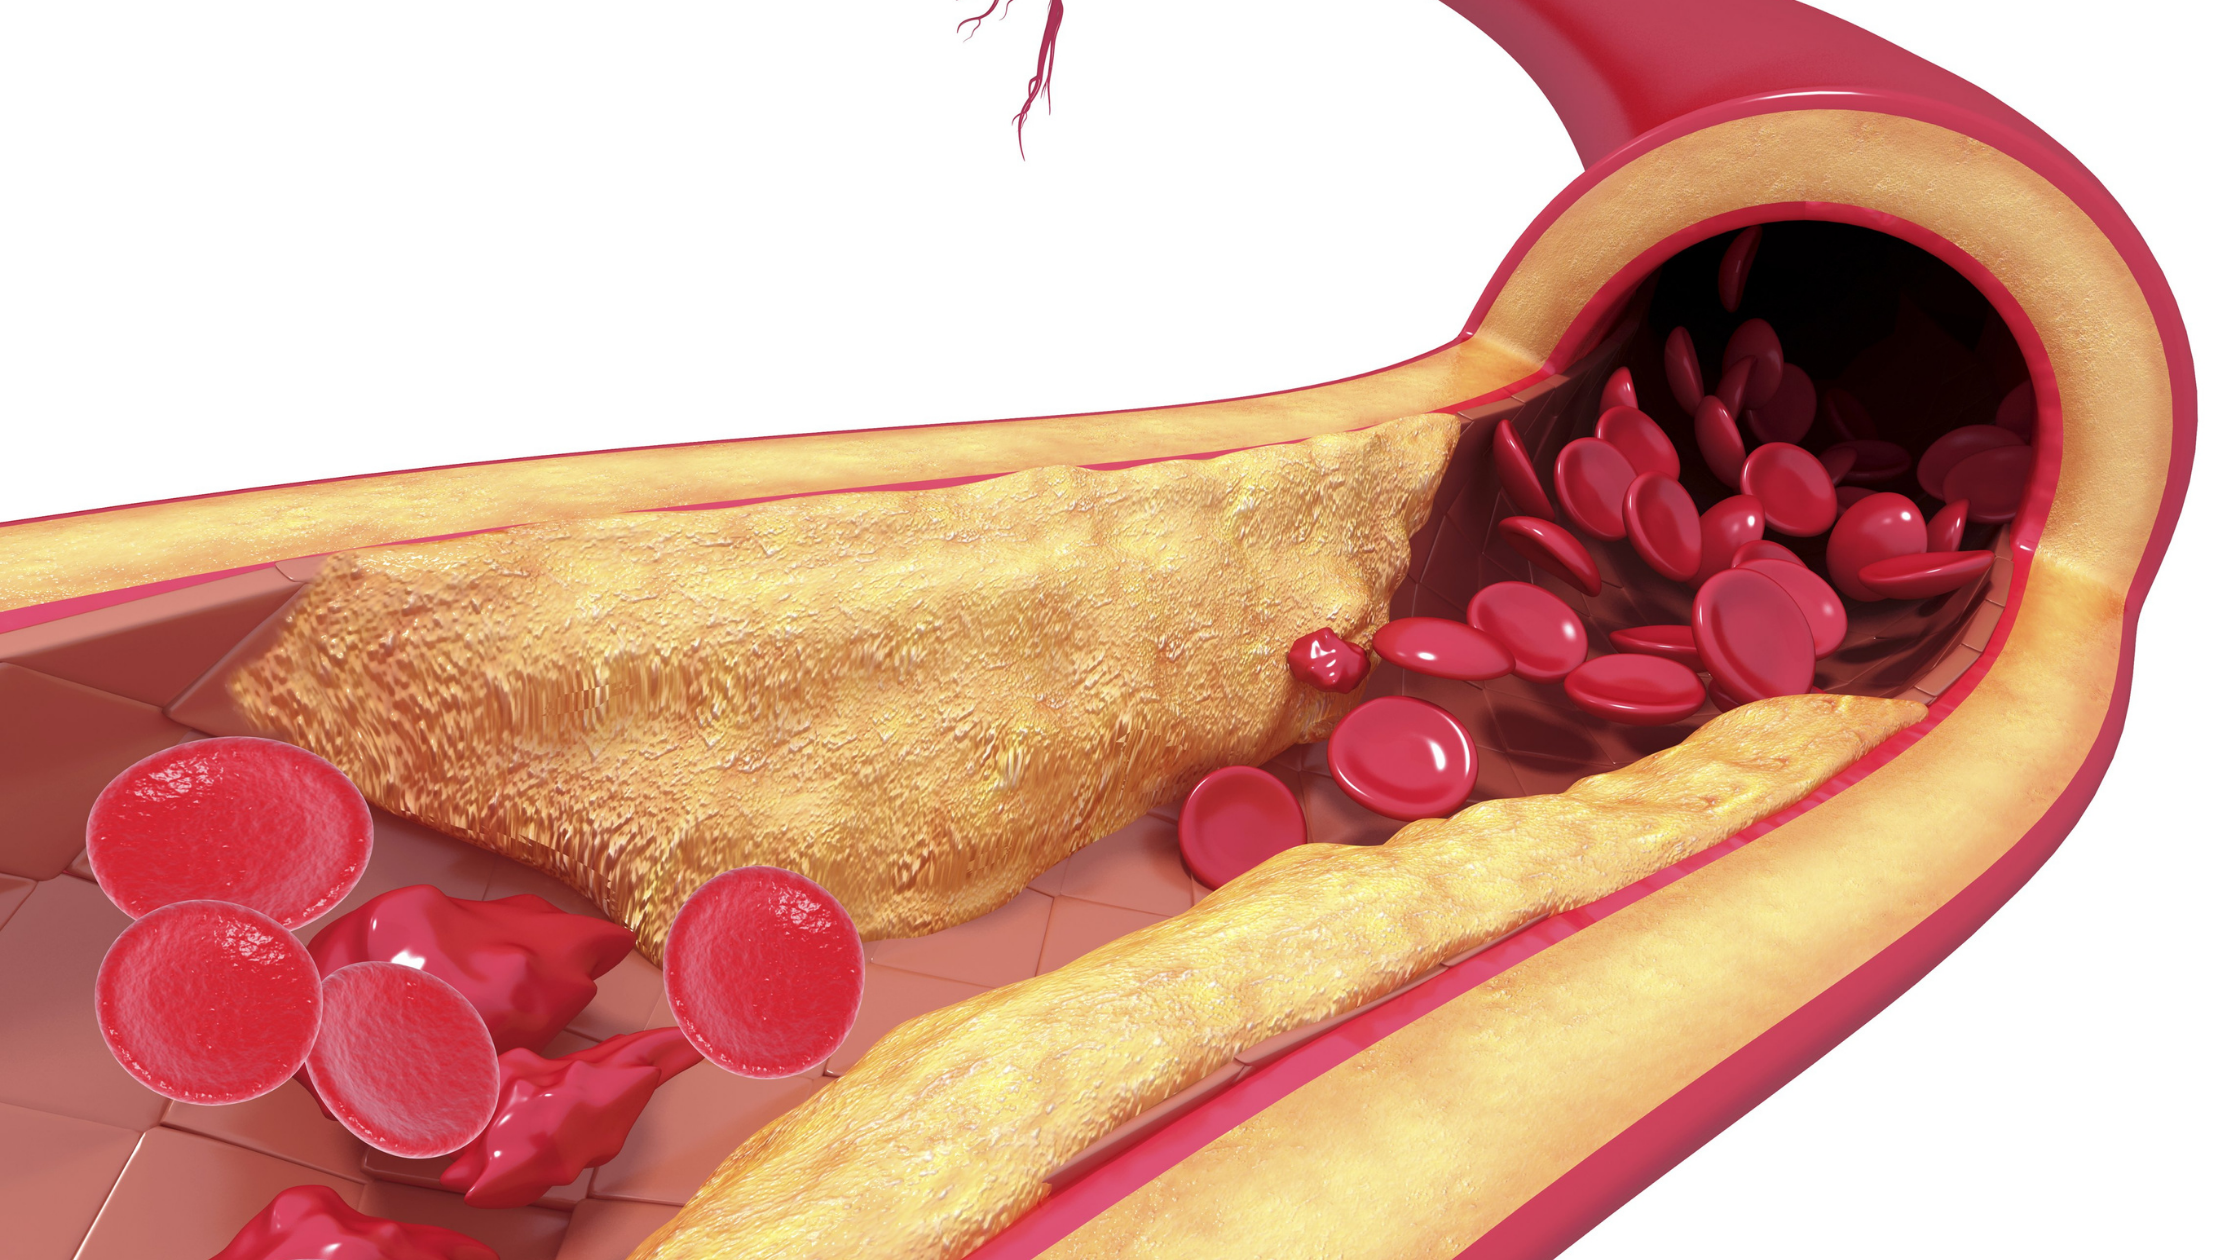 Illustration of the inside of a blood vessel, with red blood cells and cholesterol visible